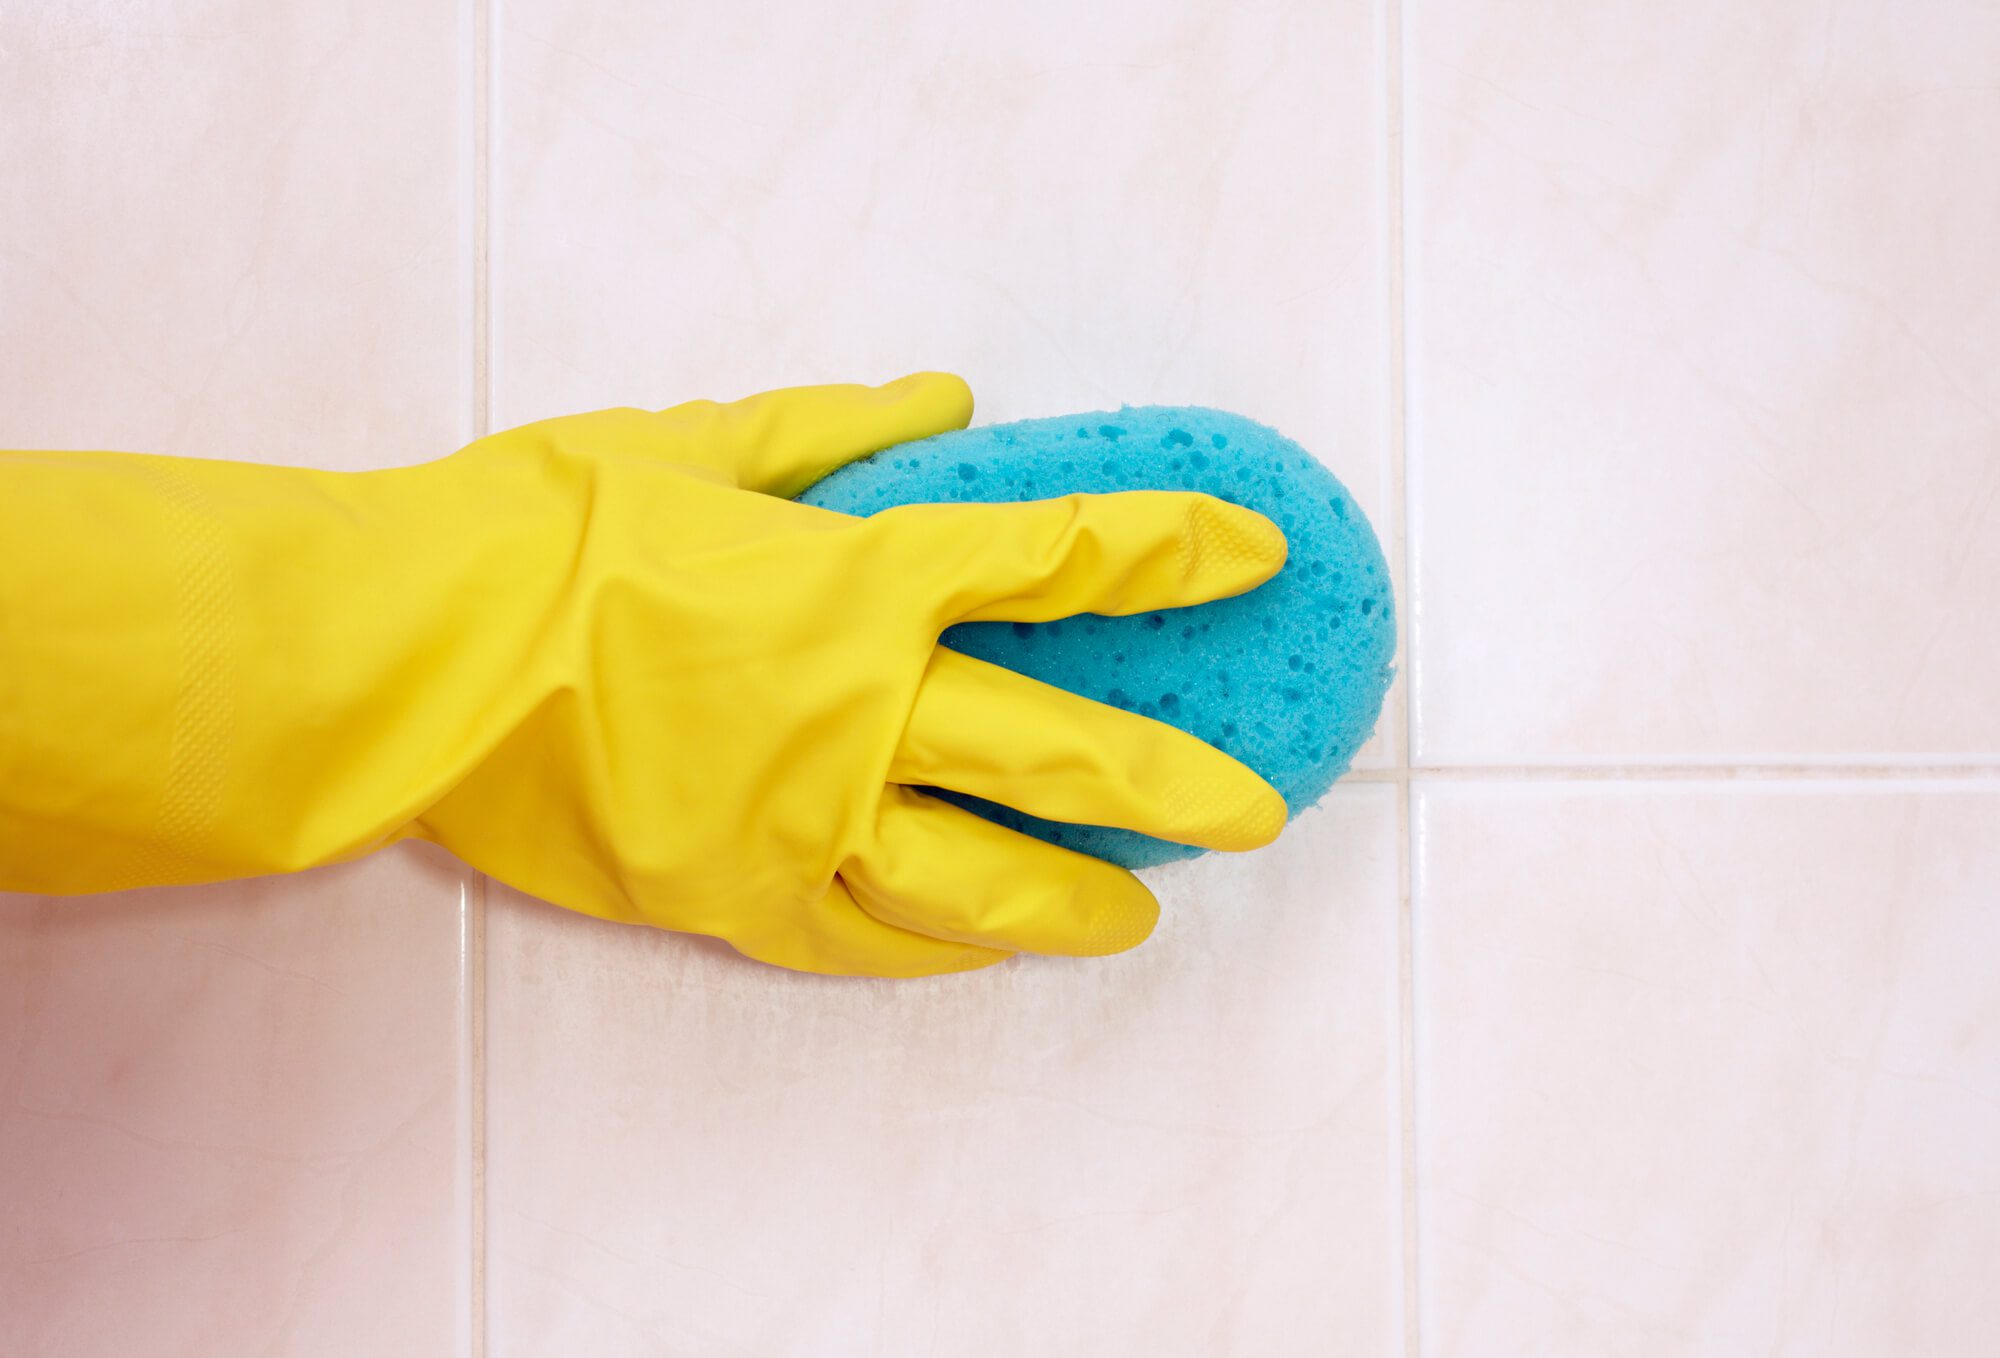 residential cleaning services in md